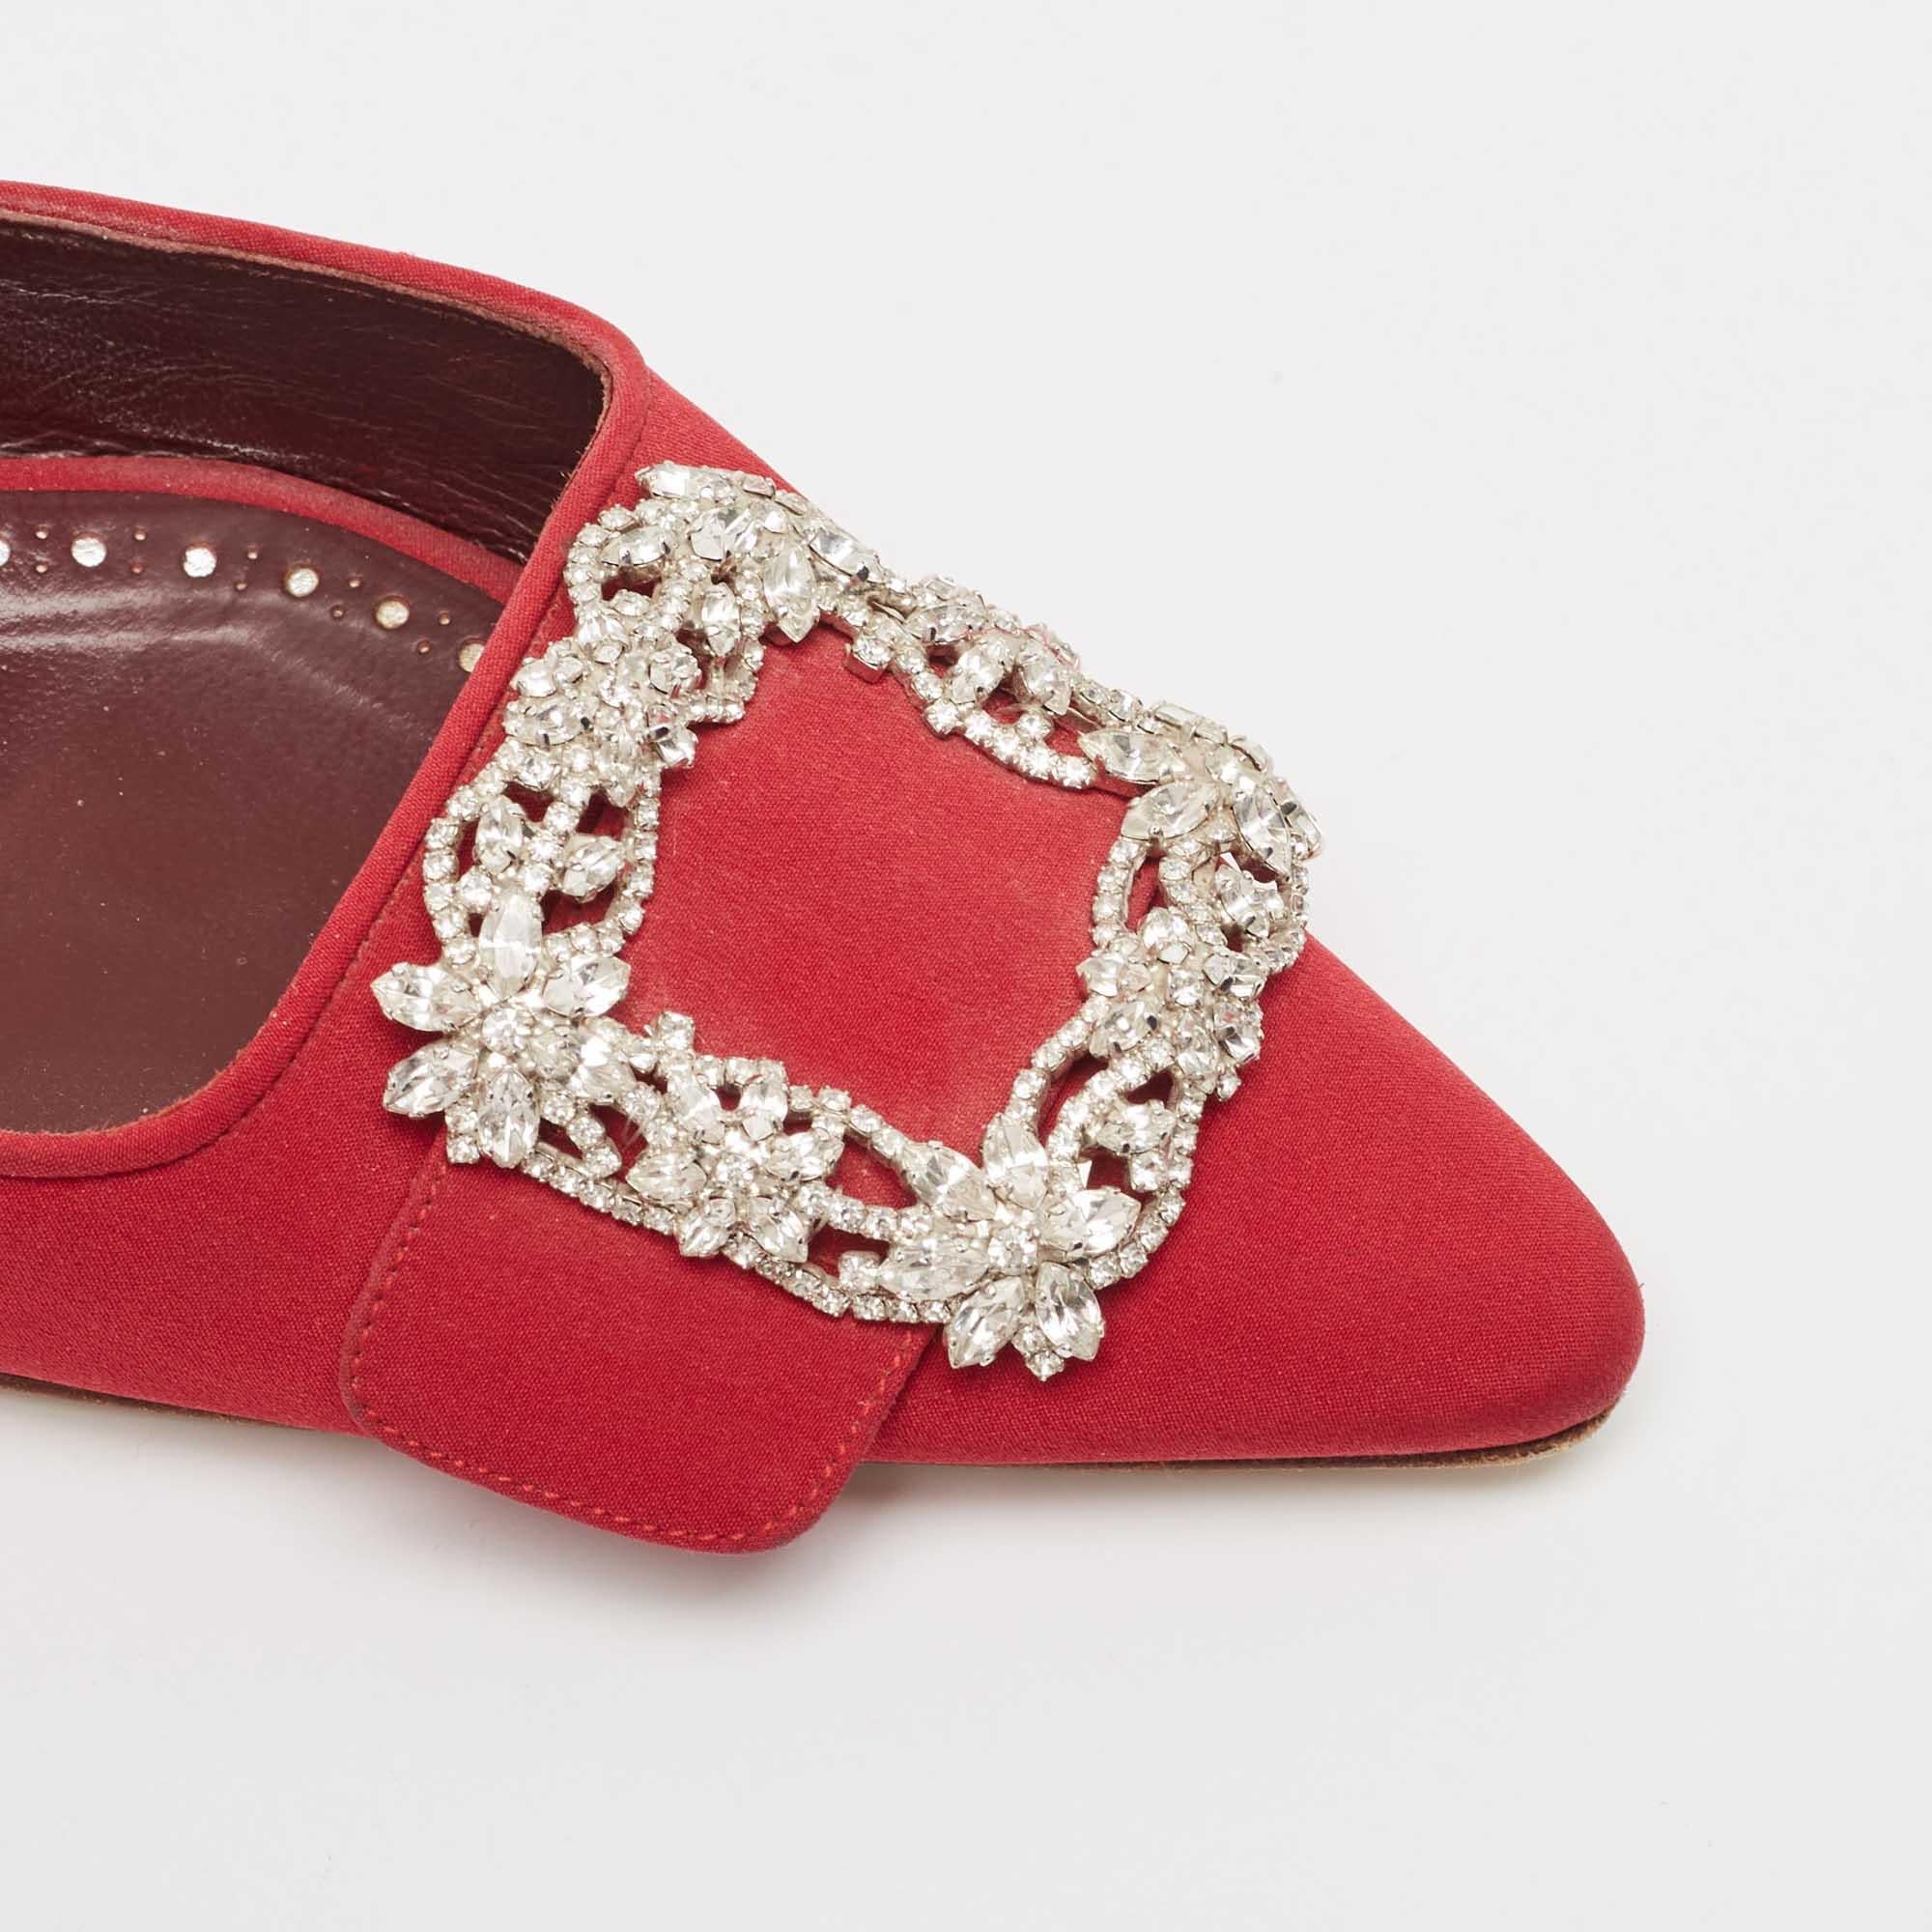 Manolo Blahnik Red Fabric Hangisi Mules Size 39.5 For Sale 3